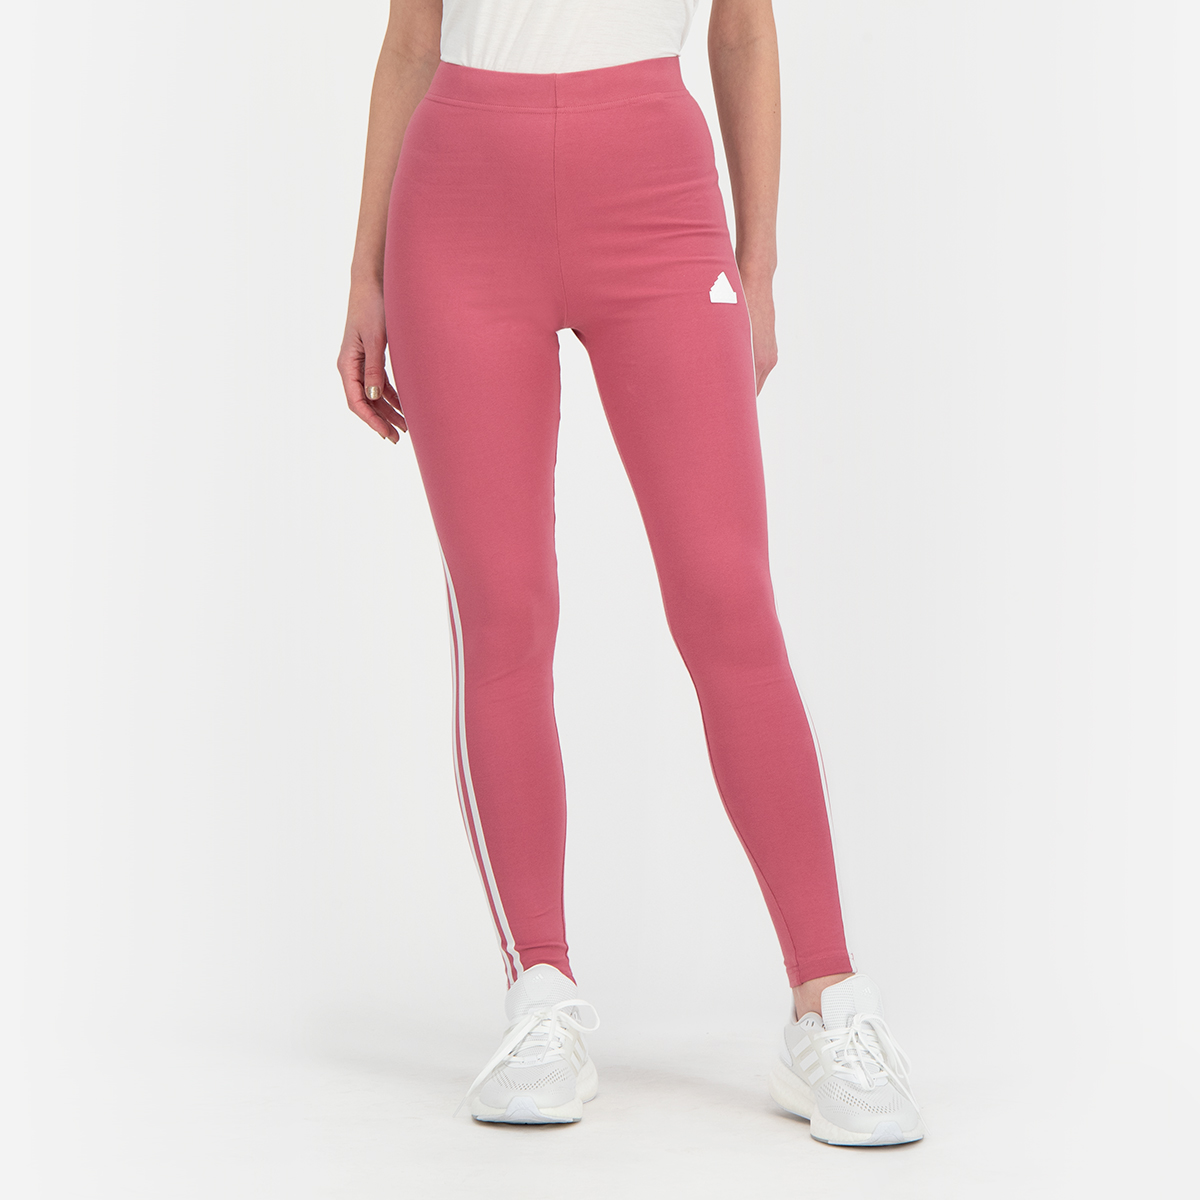 Buy Future Icons 3-Stripes Leggings - Pink Online in Kuwait